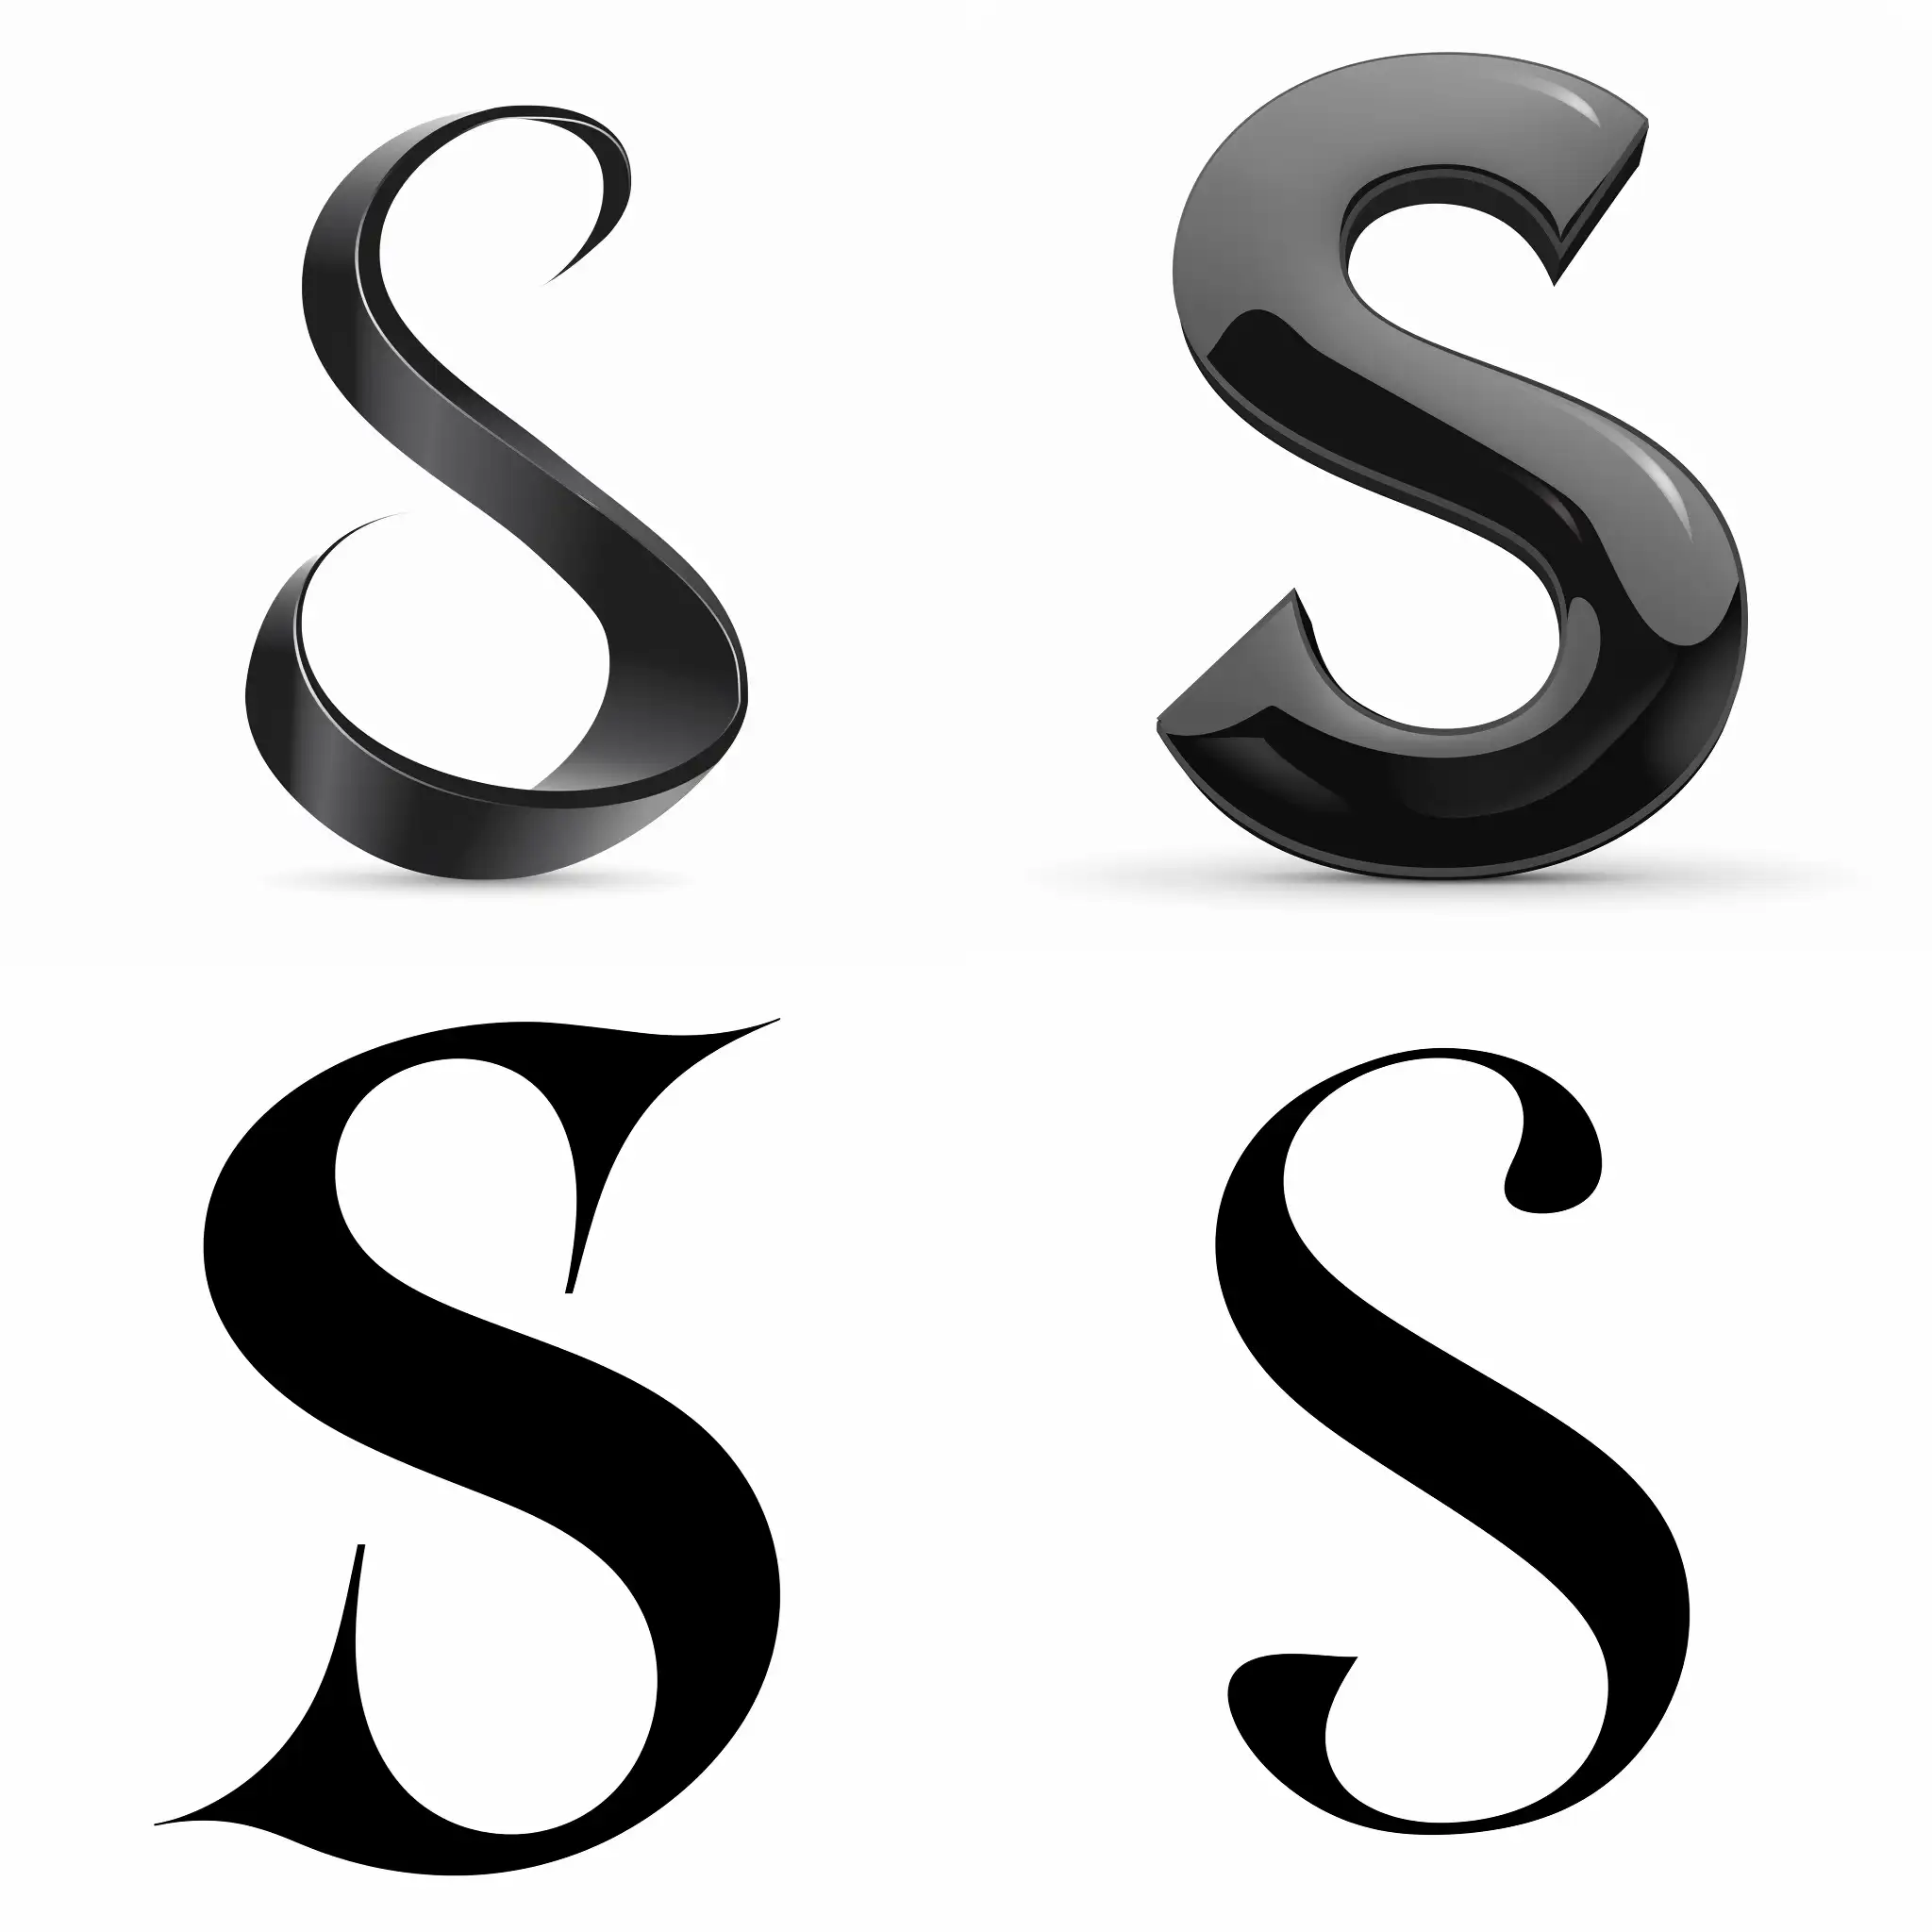 simple vector image, S shape with bottom part of the S twice as wide as the top part